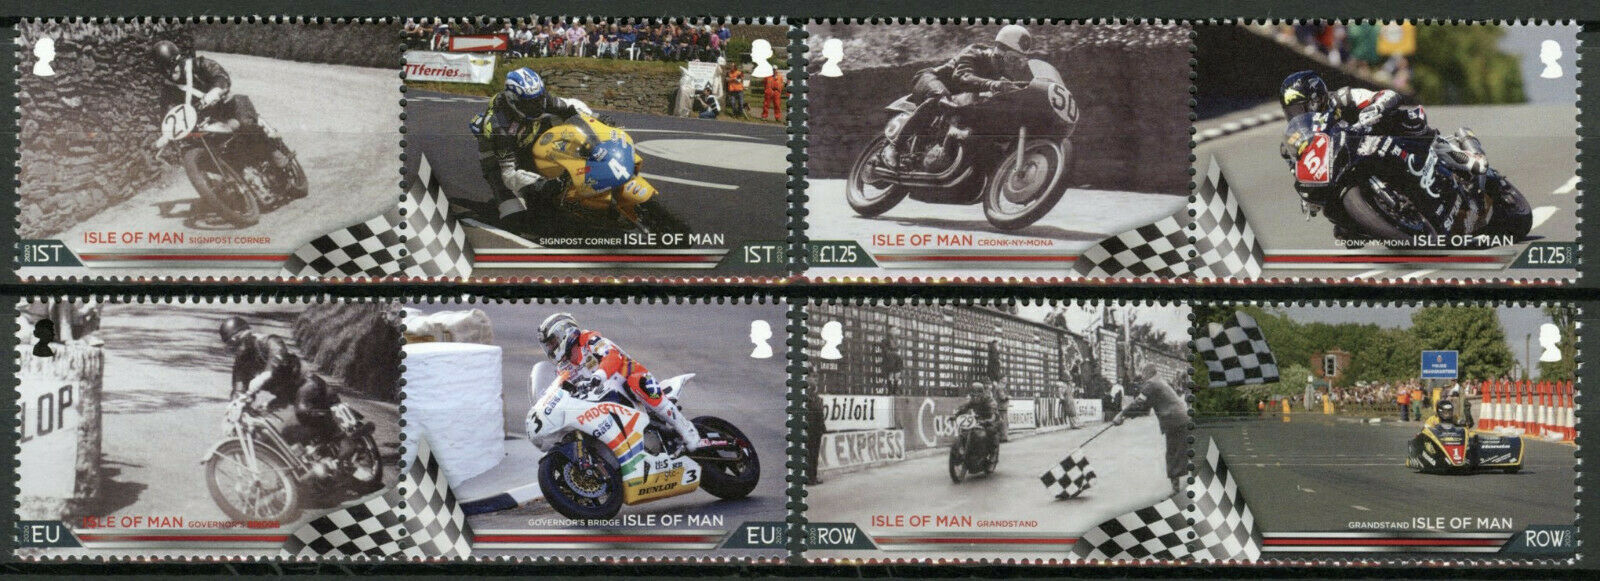 Isle of Man IOM Motorcycles Stamps 2020 MNH TT Course 37 3/4 Miles 8v Set